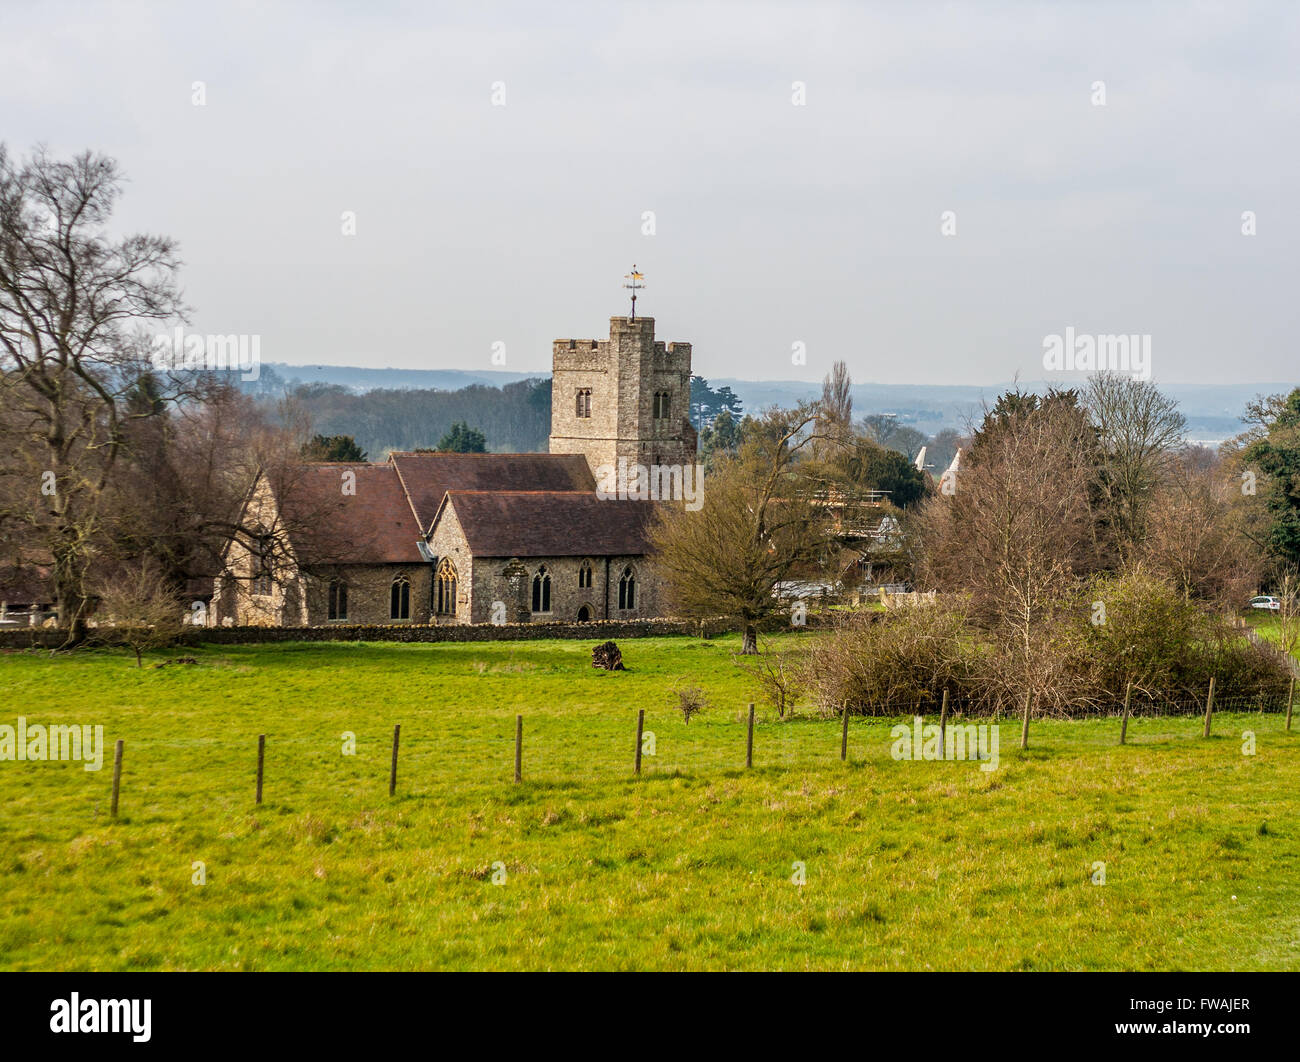 Boxley village and St Mary's church Boxley, Kent across green fields from a distance Stock Photo